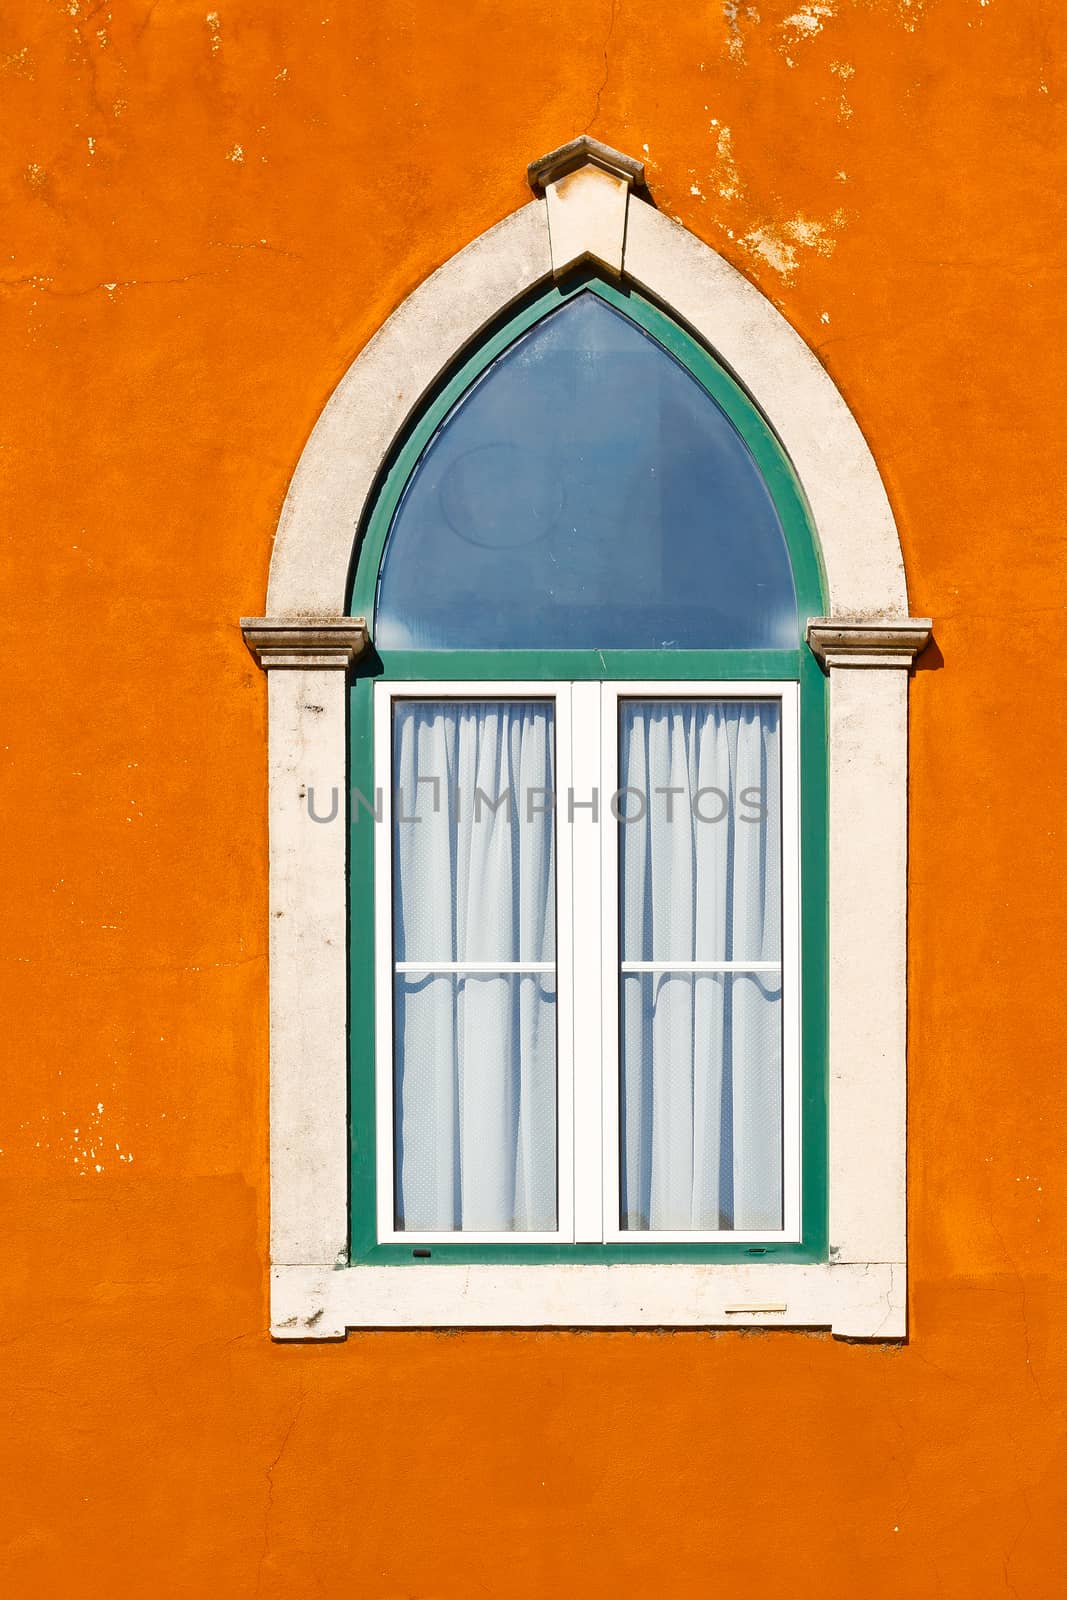 Lancet Window of the Old Portugal House